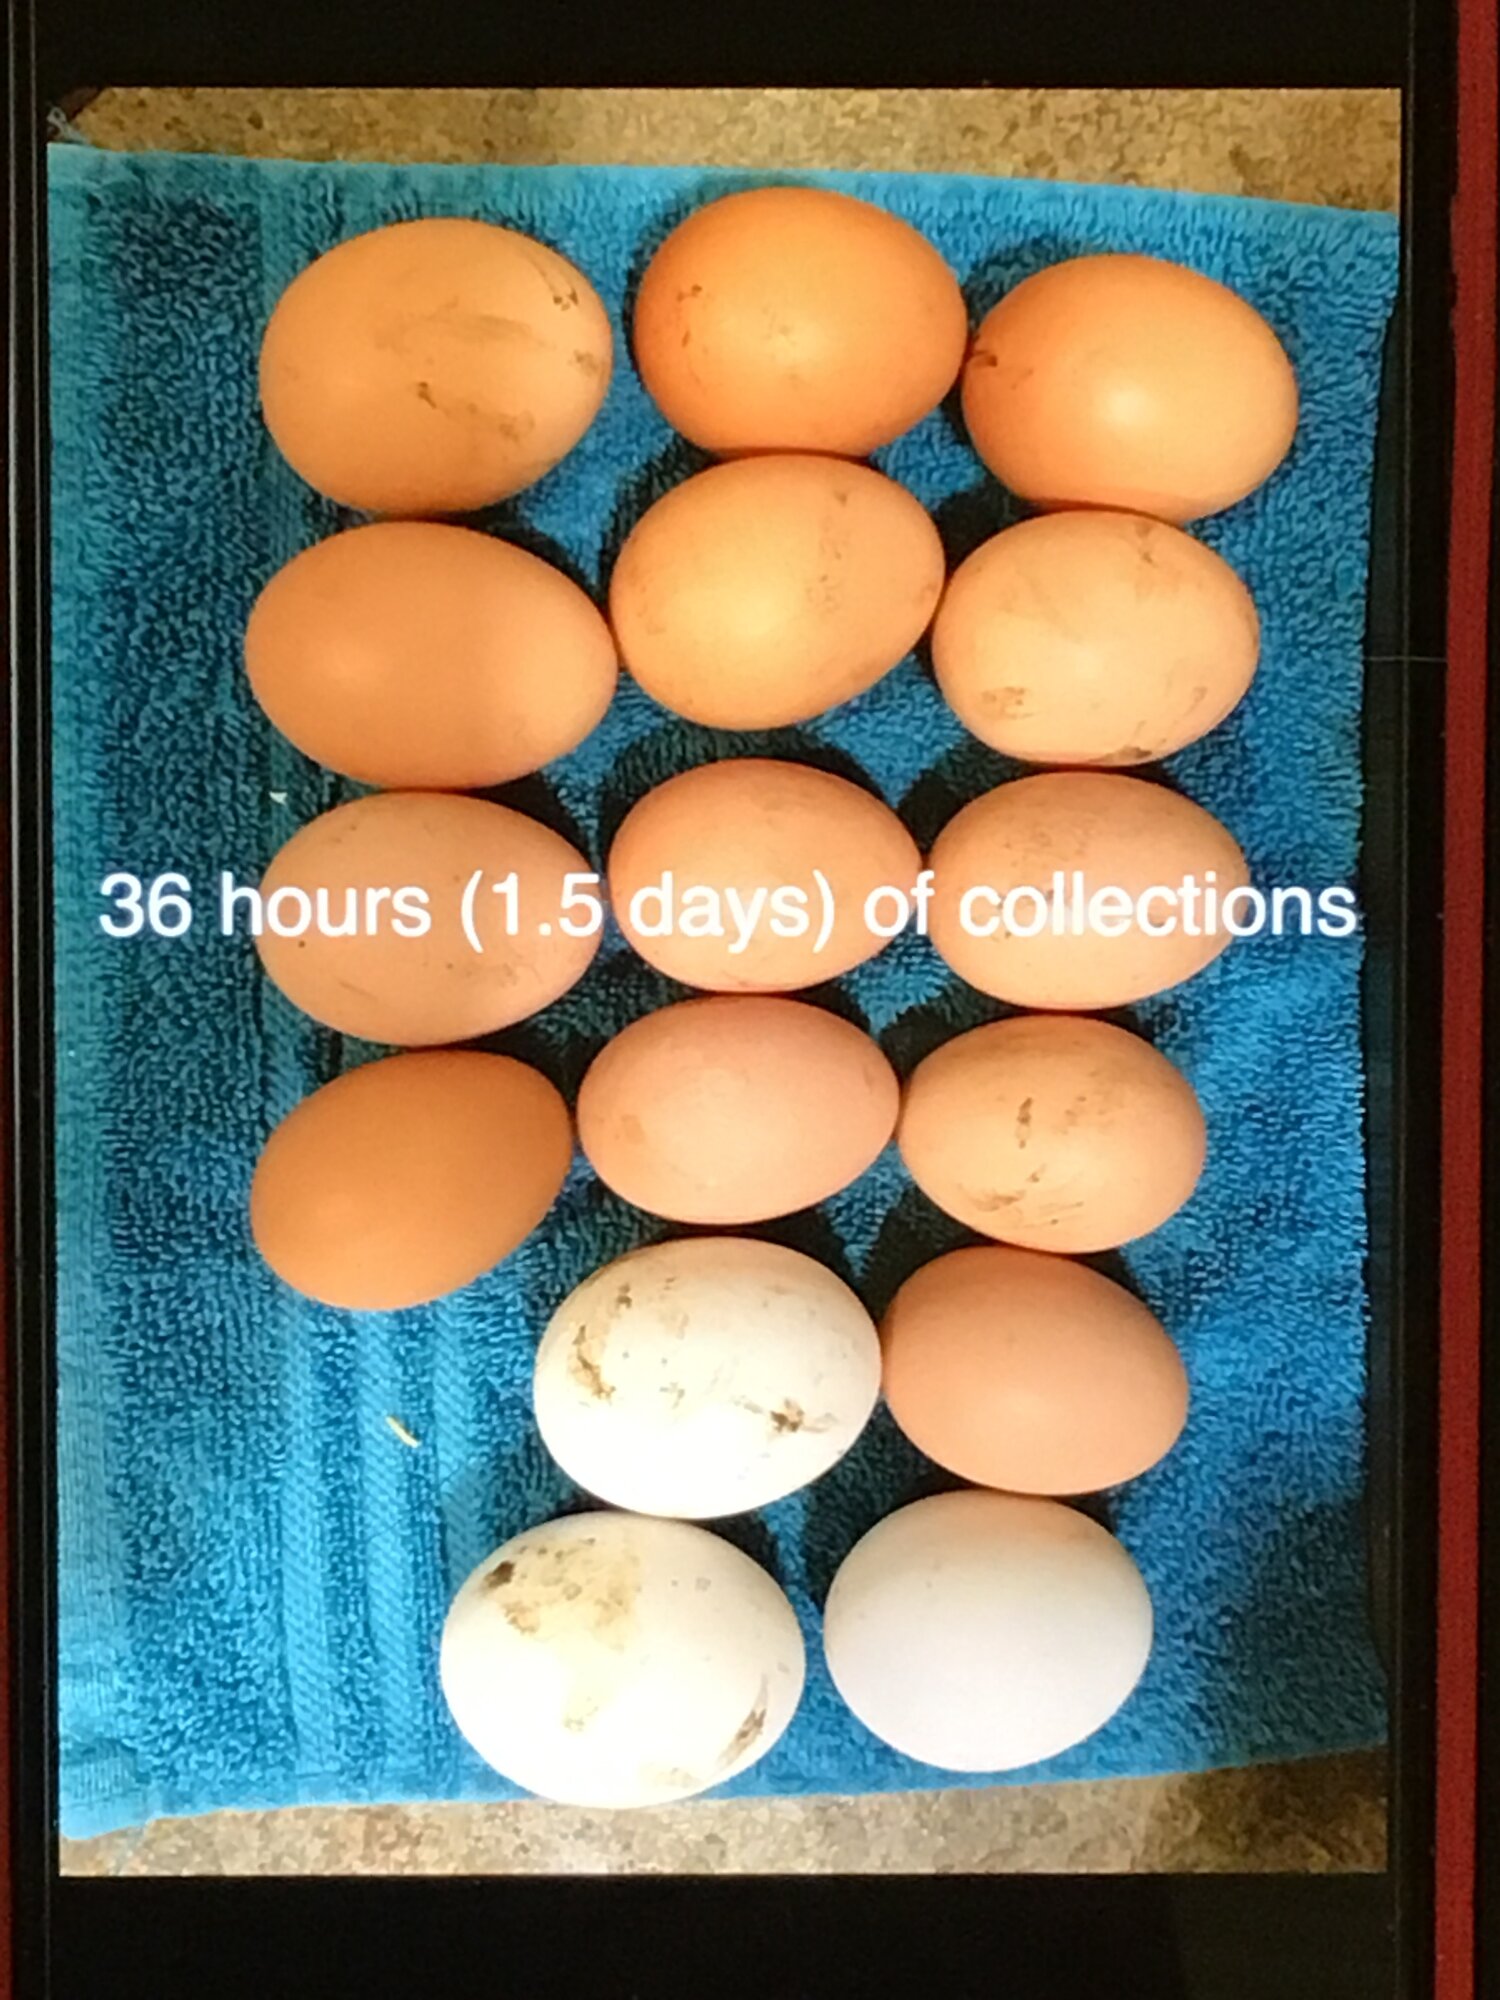 Egg Anomalies | BackYard Chickens - Learn How to Raise ...